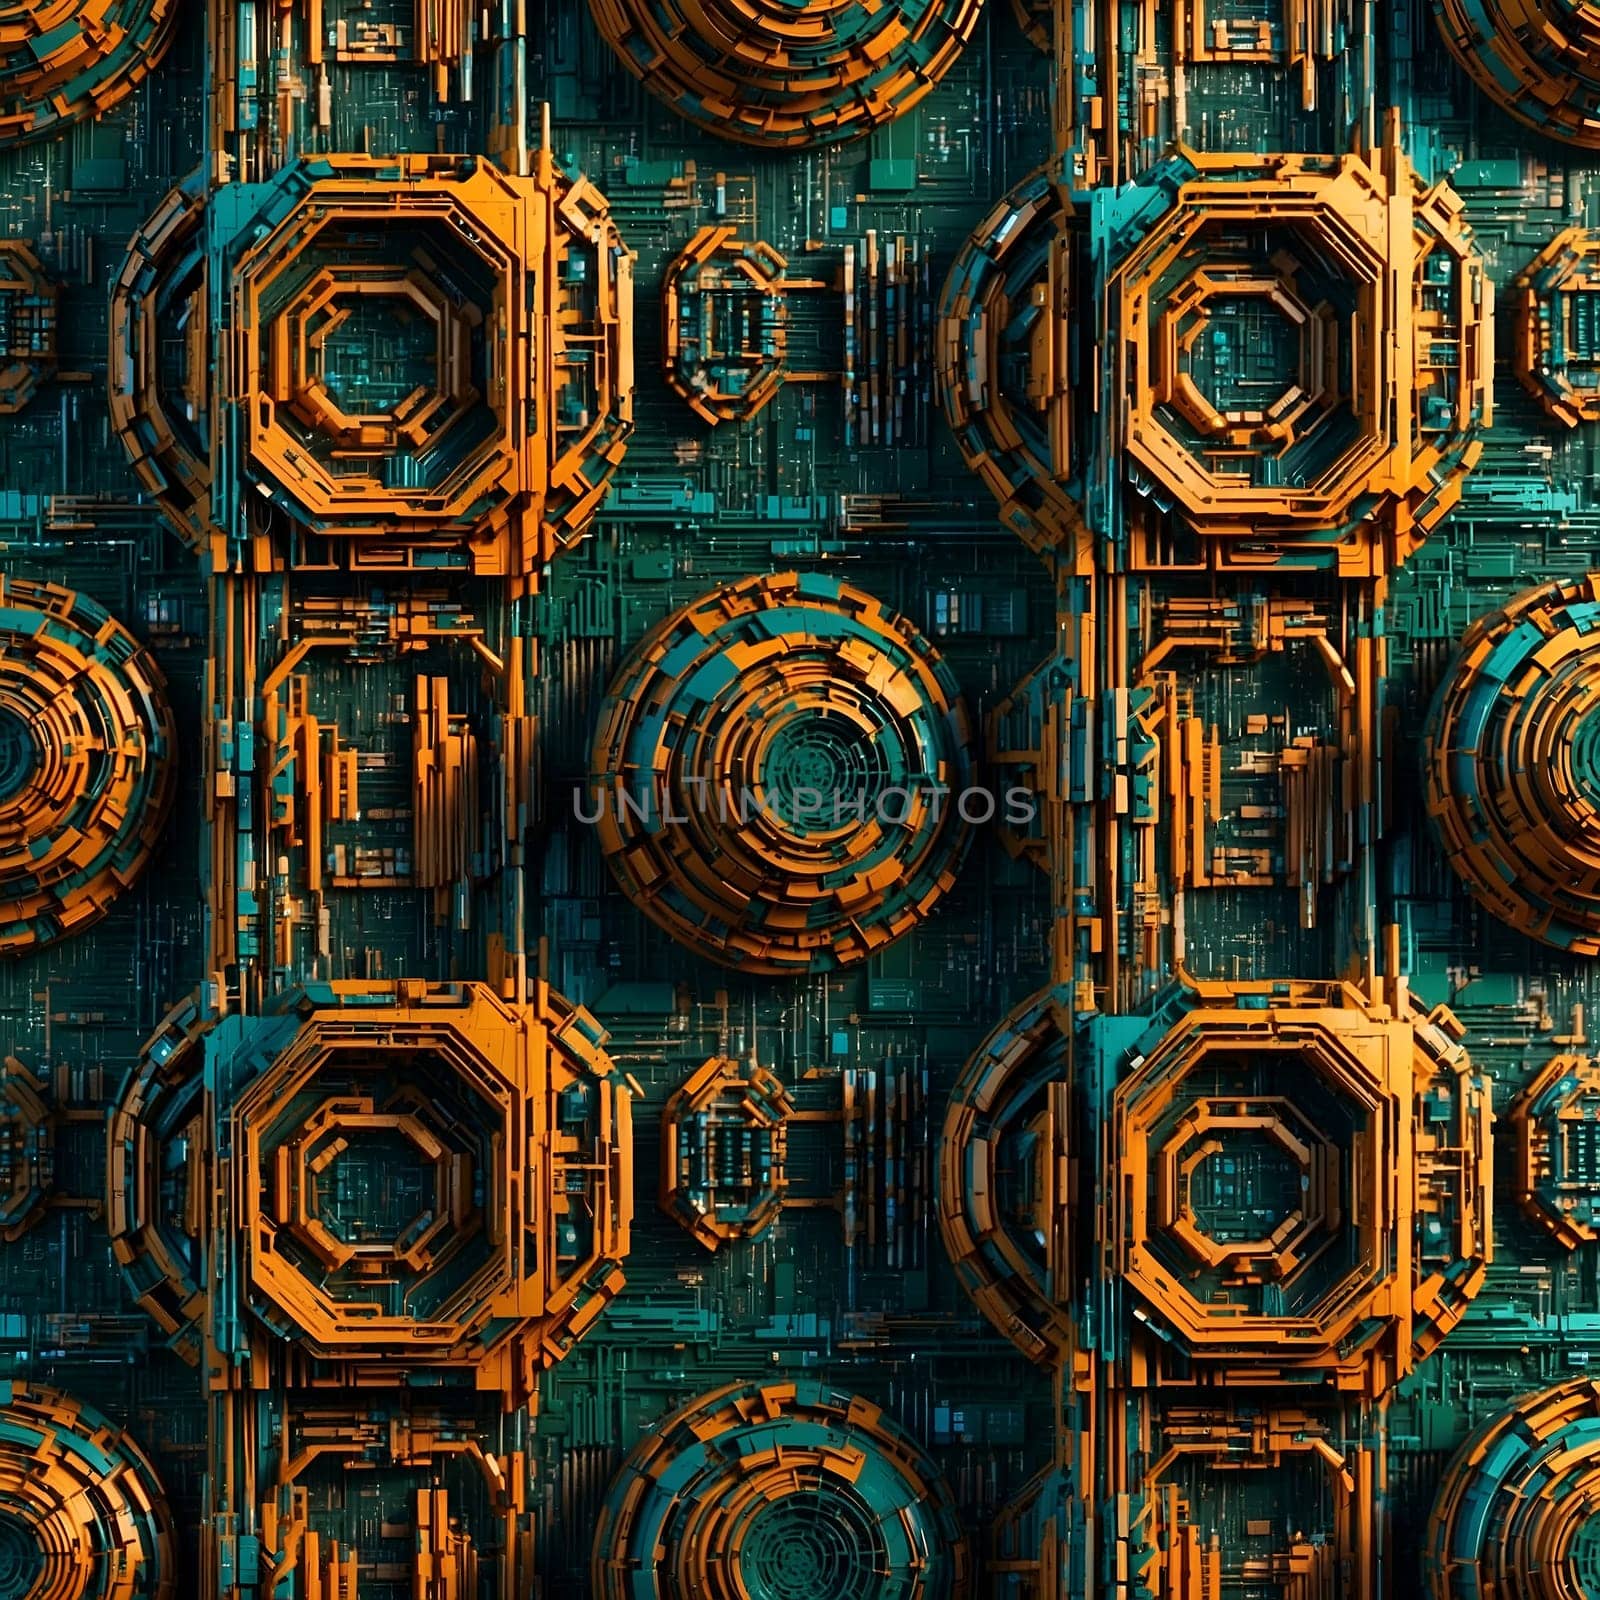 This close-up photo showcases a seamless pattern composed of circles, creating an intriguing visual design.